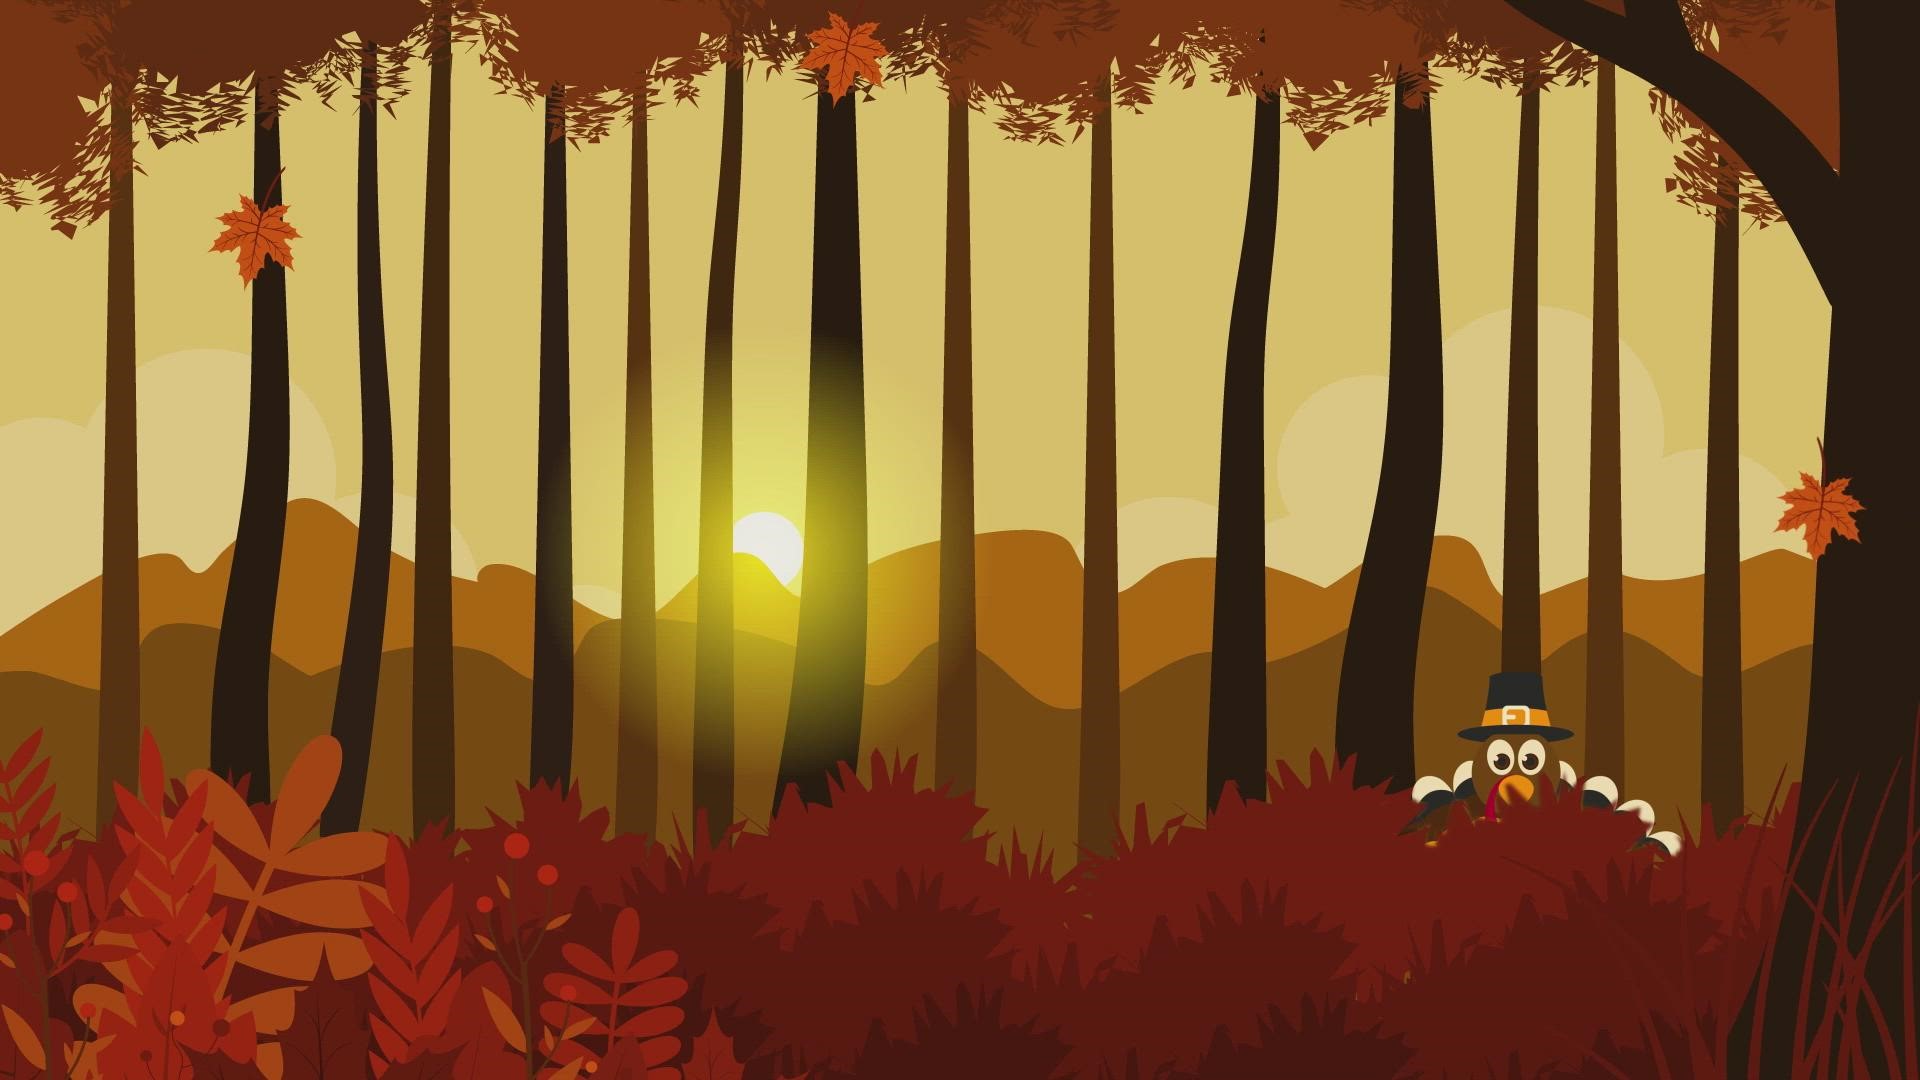 Happy Thanksgiving! Enjoy a calming view of leaves falling amid a turkey hiding out for the day.